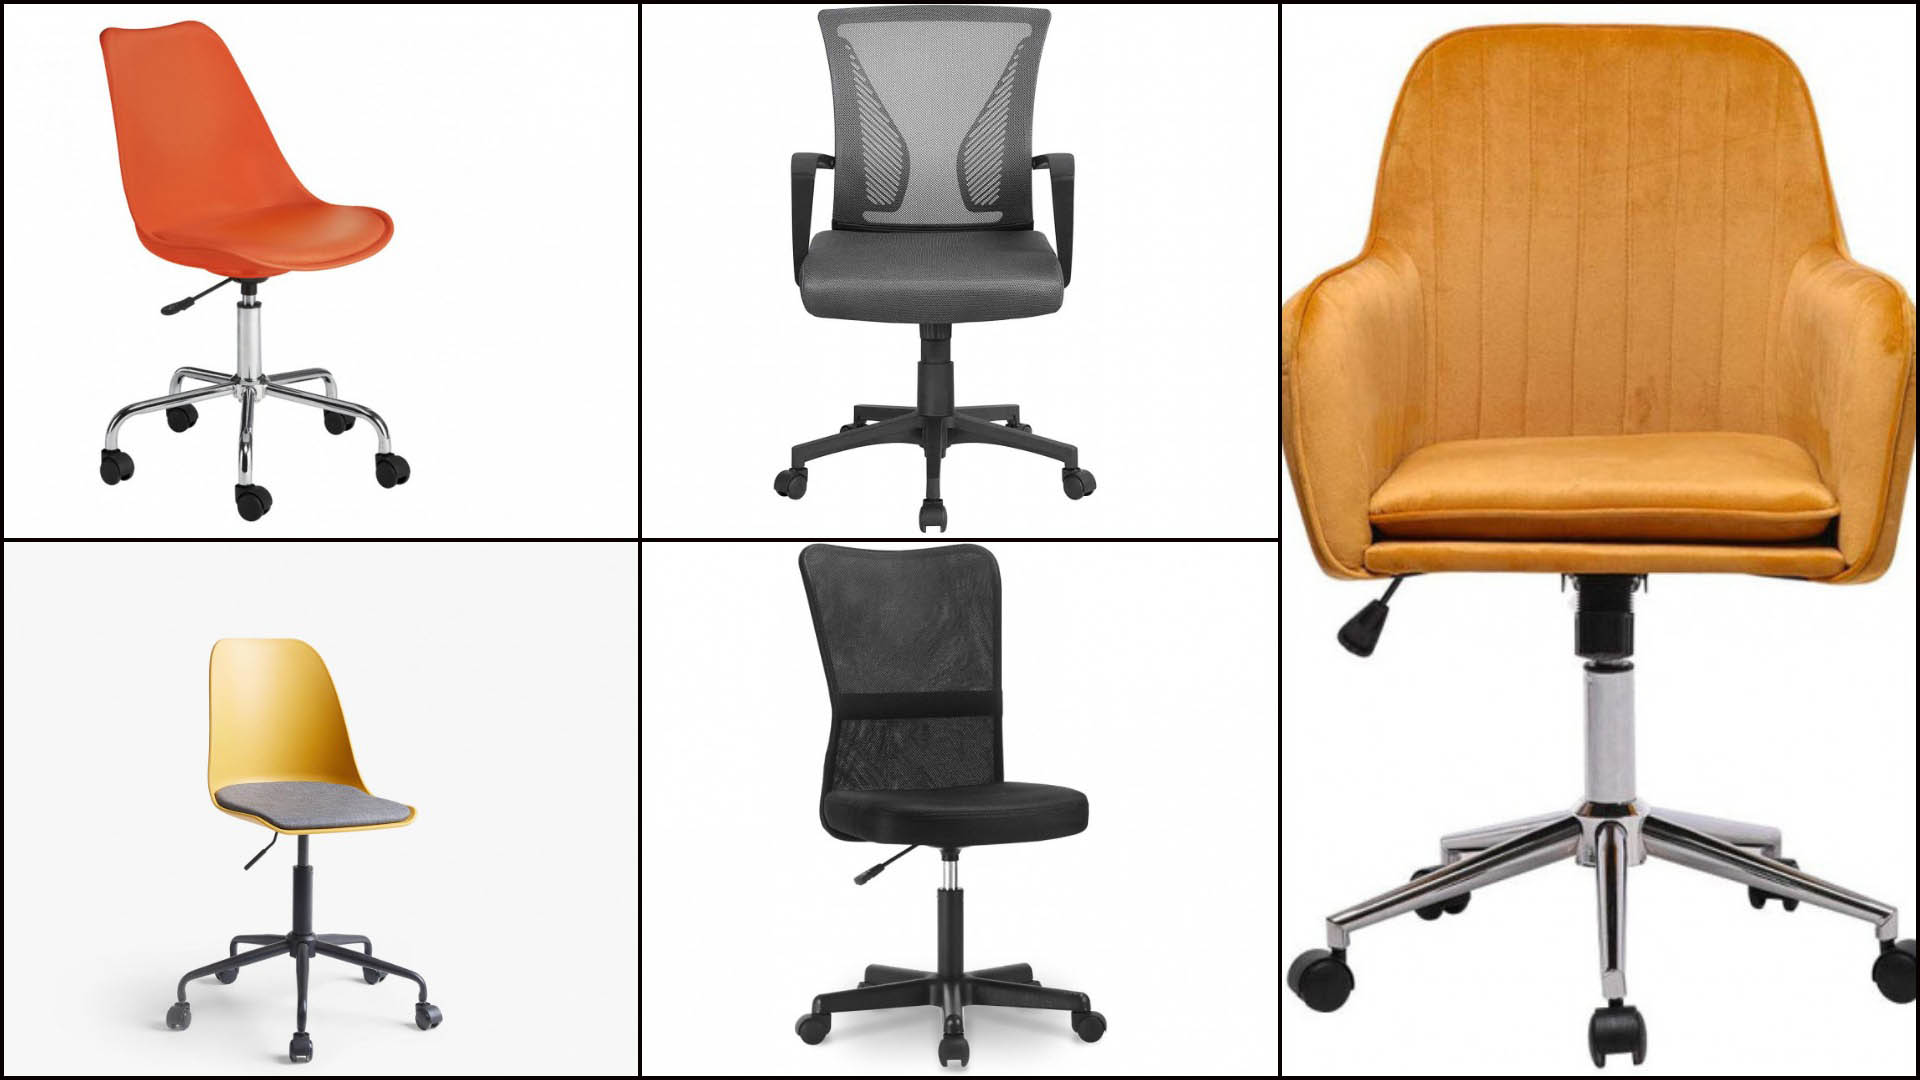 Best Budget Office Chairs Uk In 2021, Best Office Chairs Without Arms